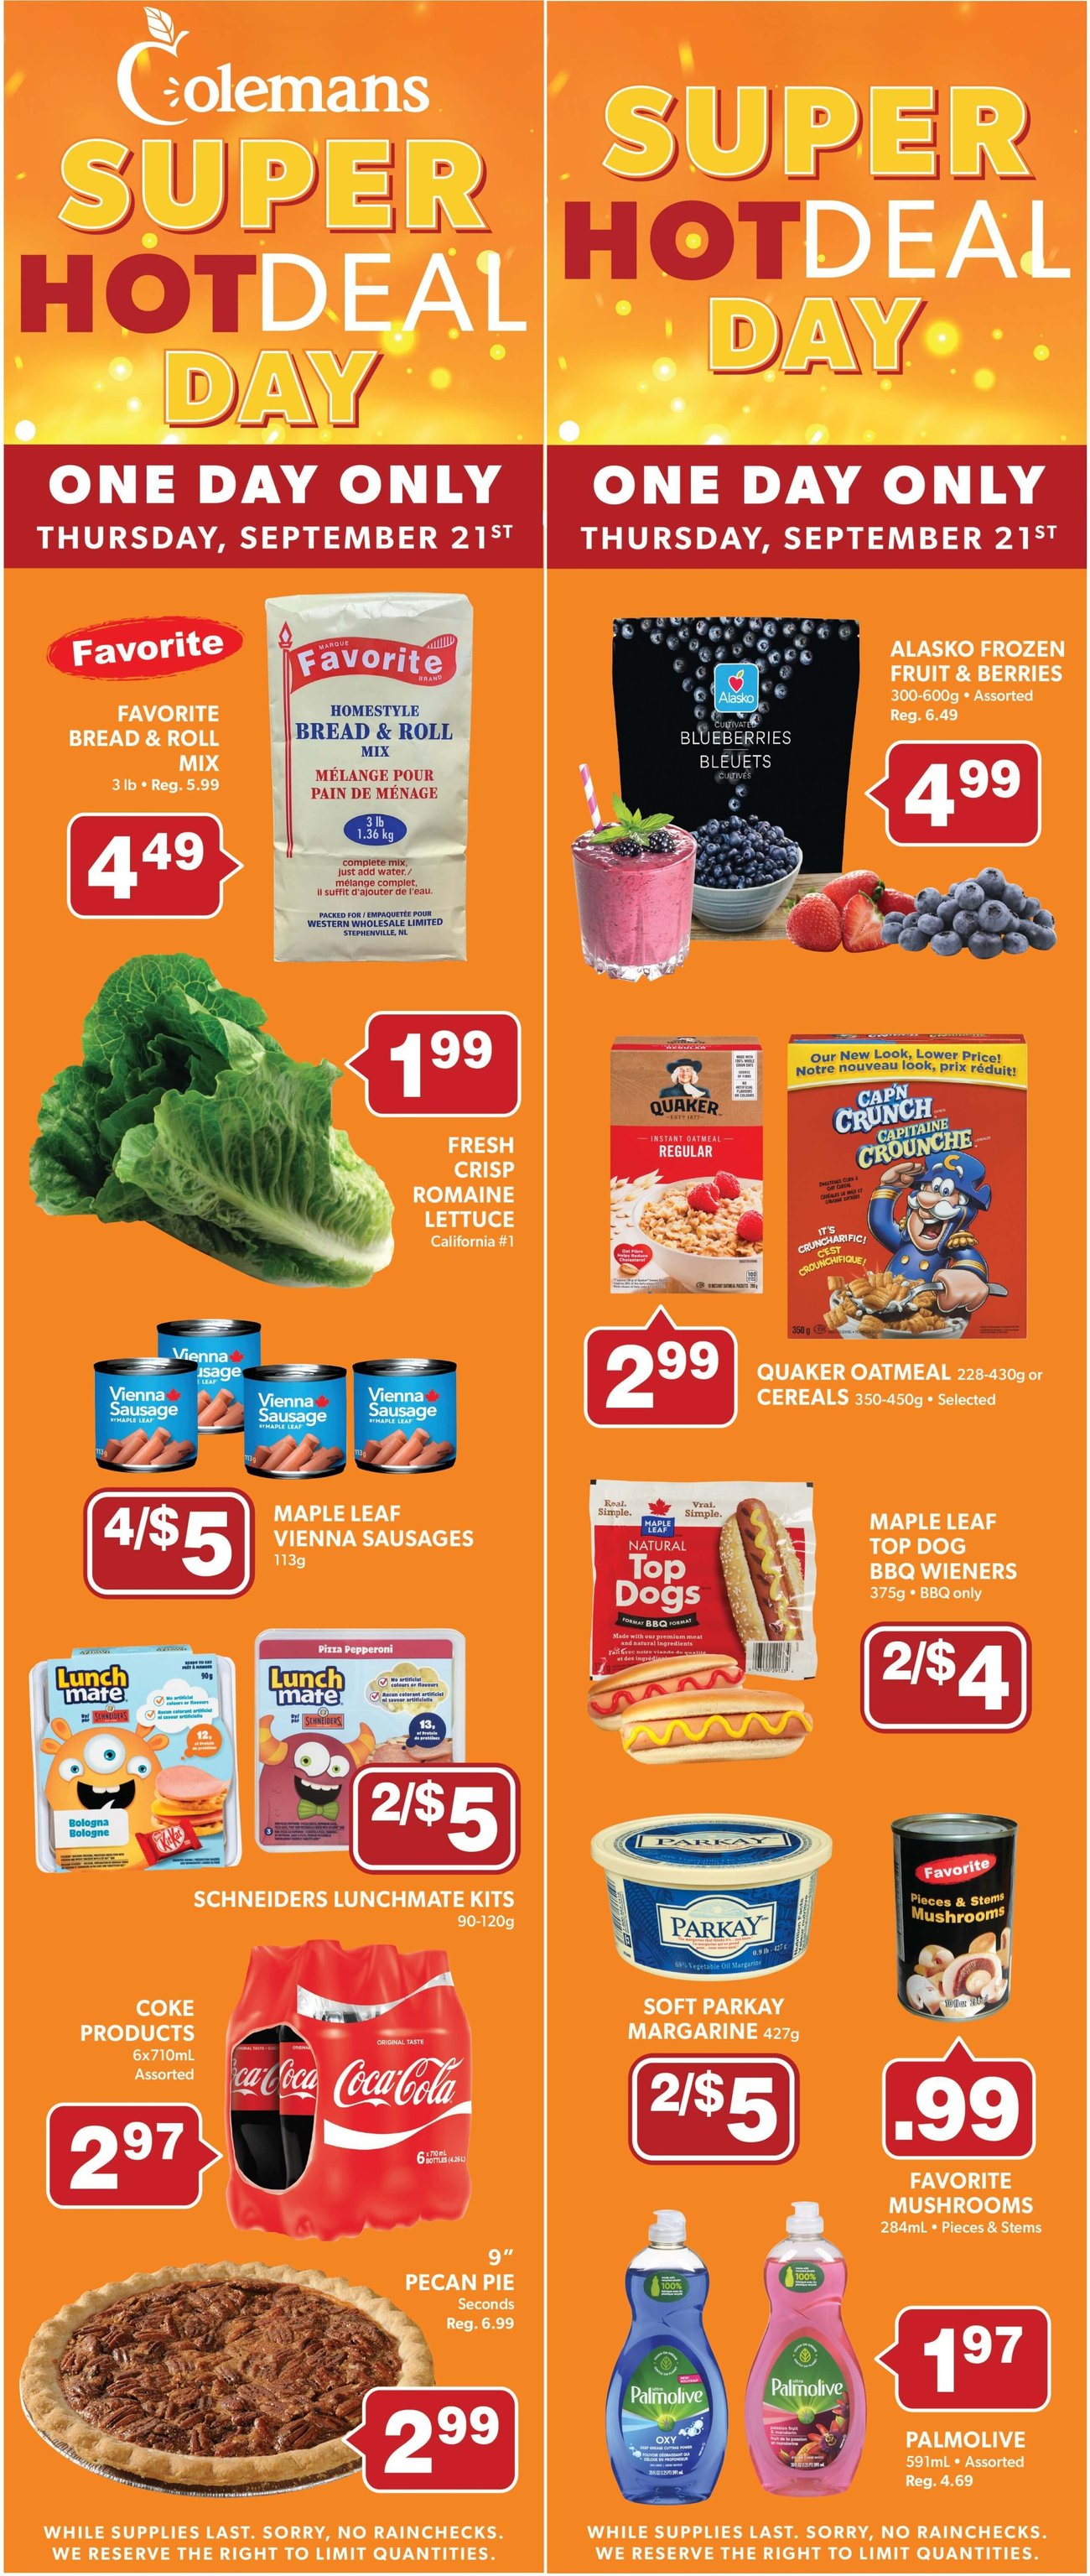 Colemans - Weekly Flyer Specials - Page 2